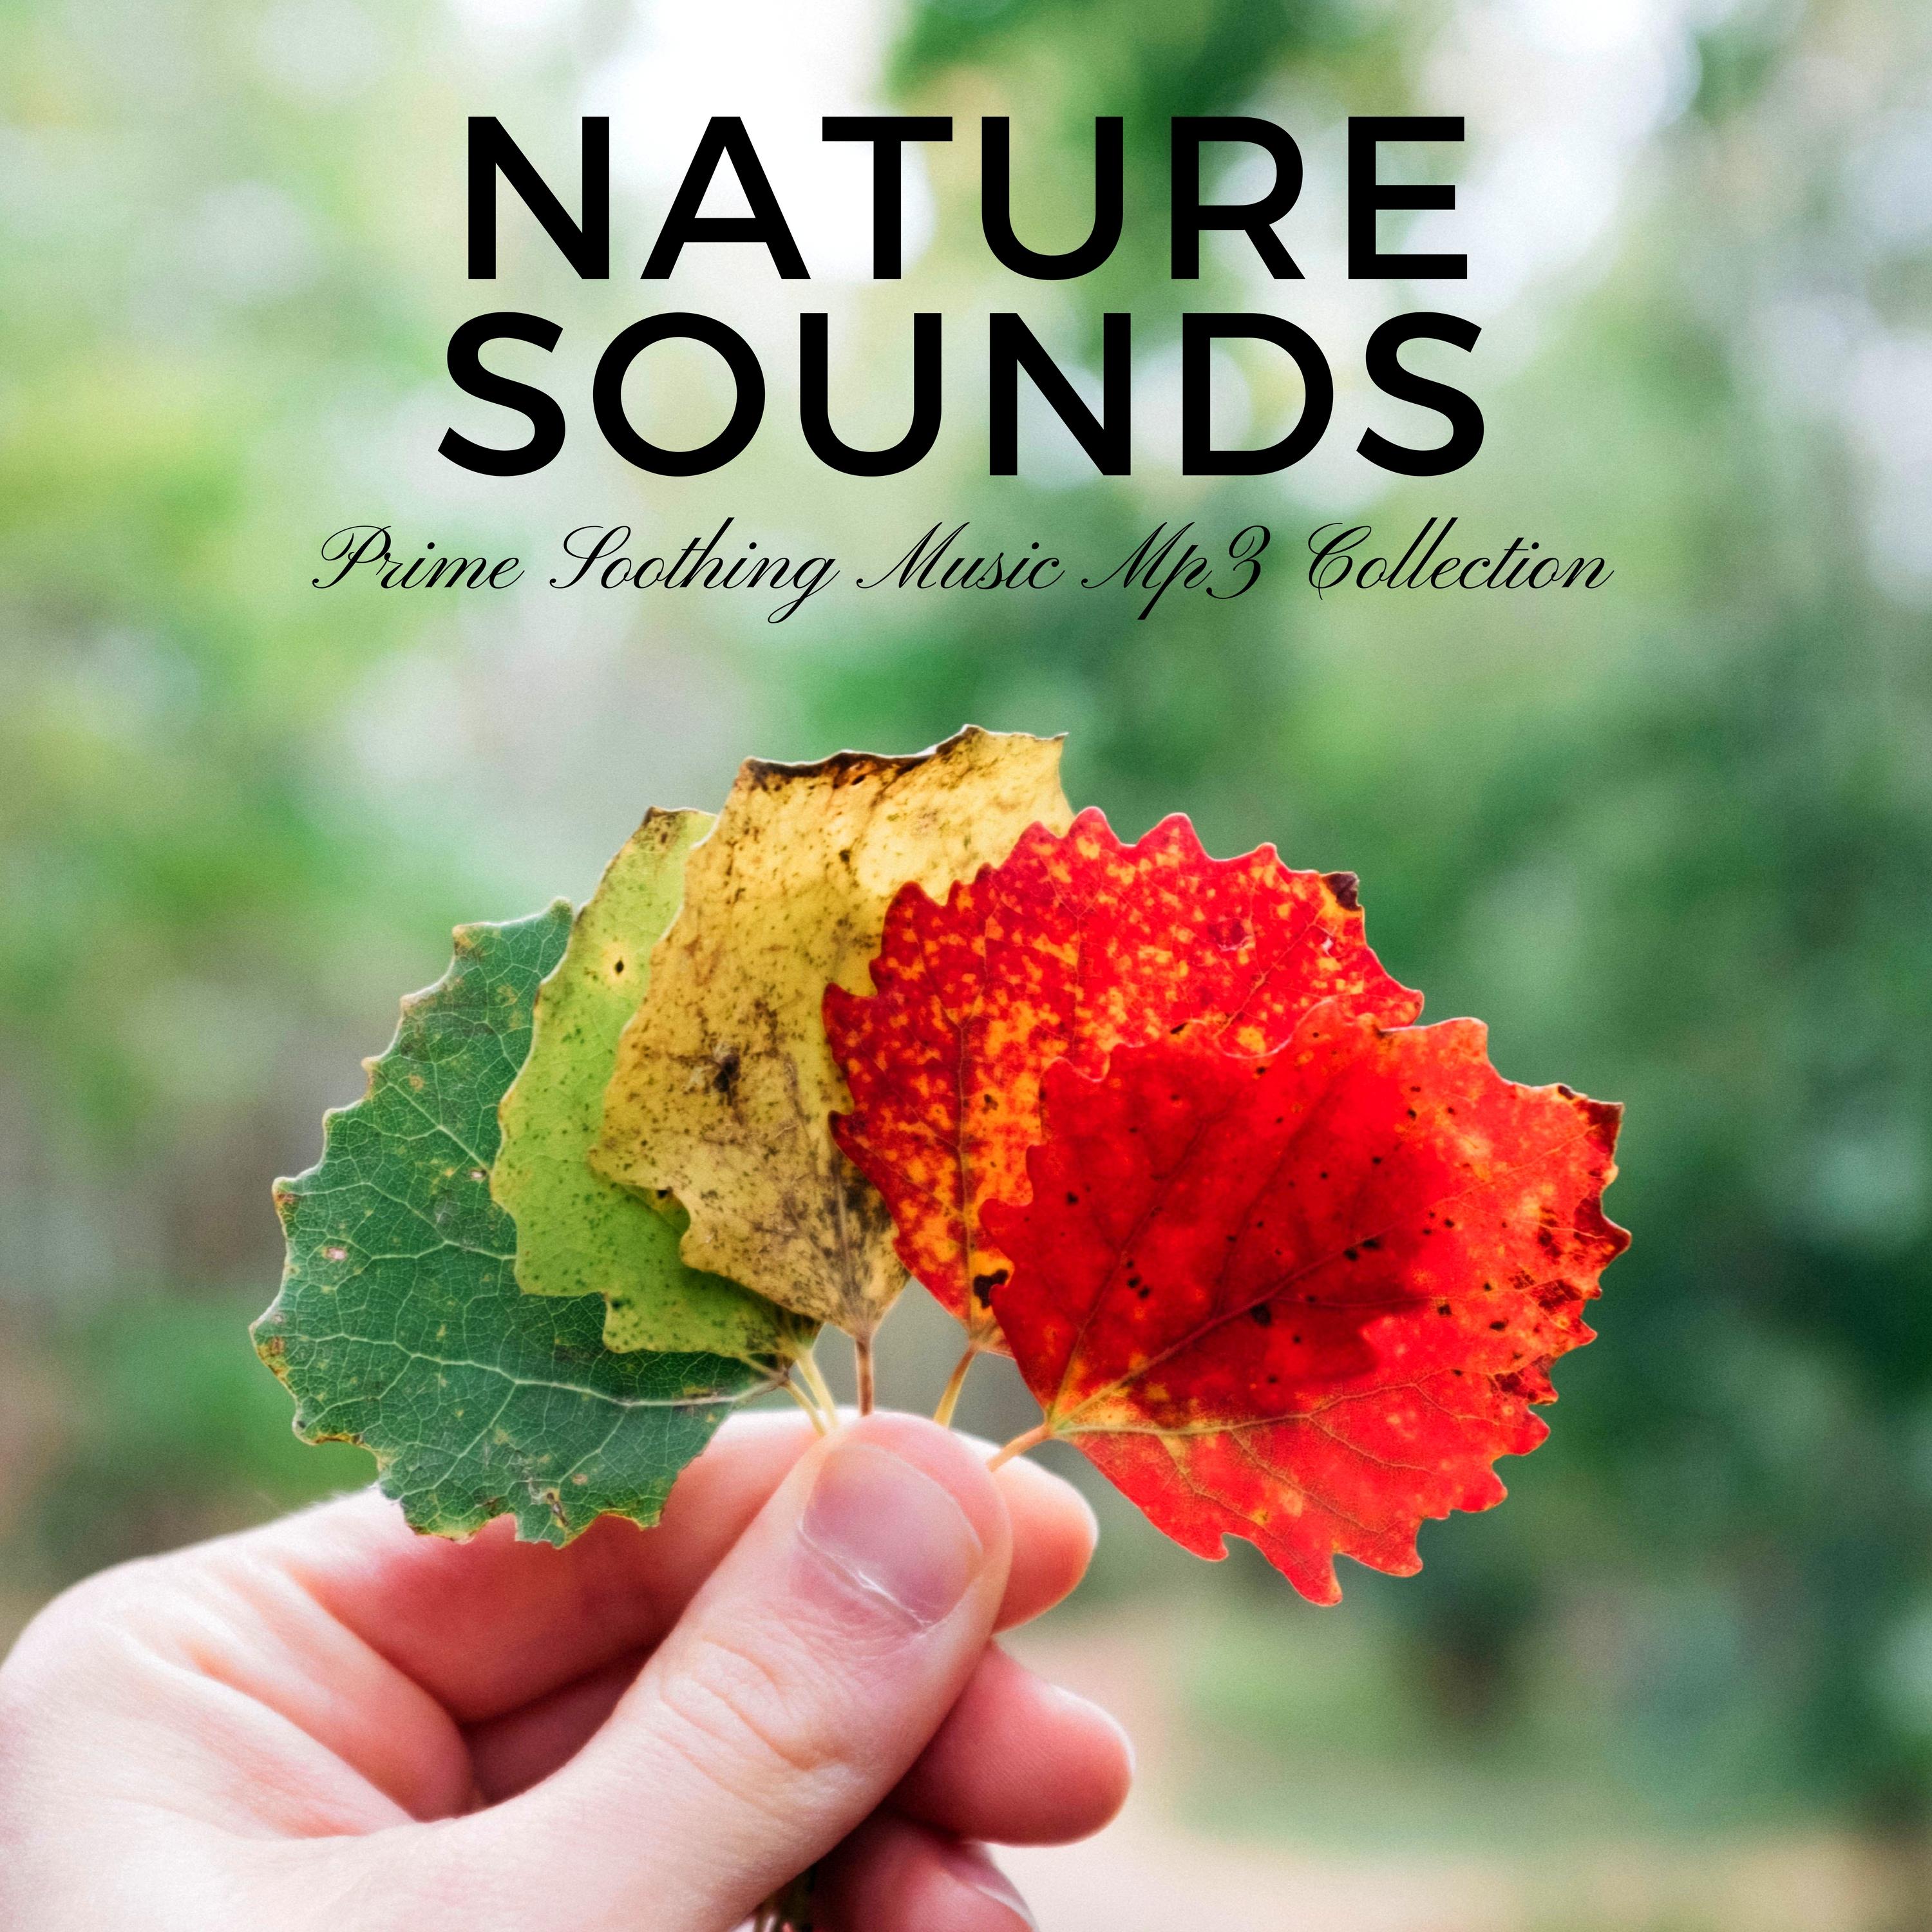 Nature Sounds - Prime Soothing Music Mp3 Collection